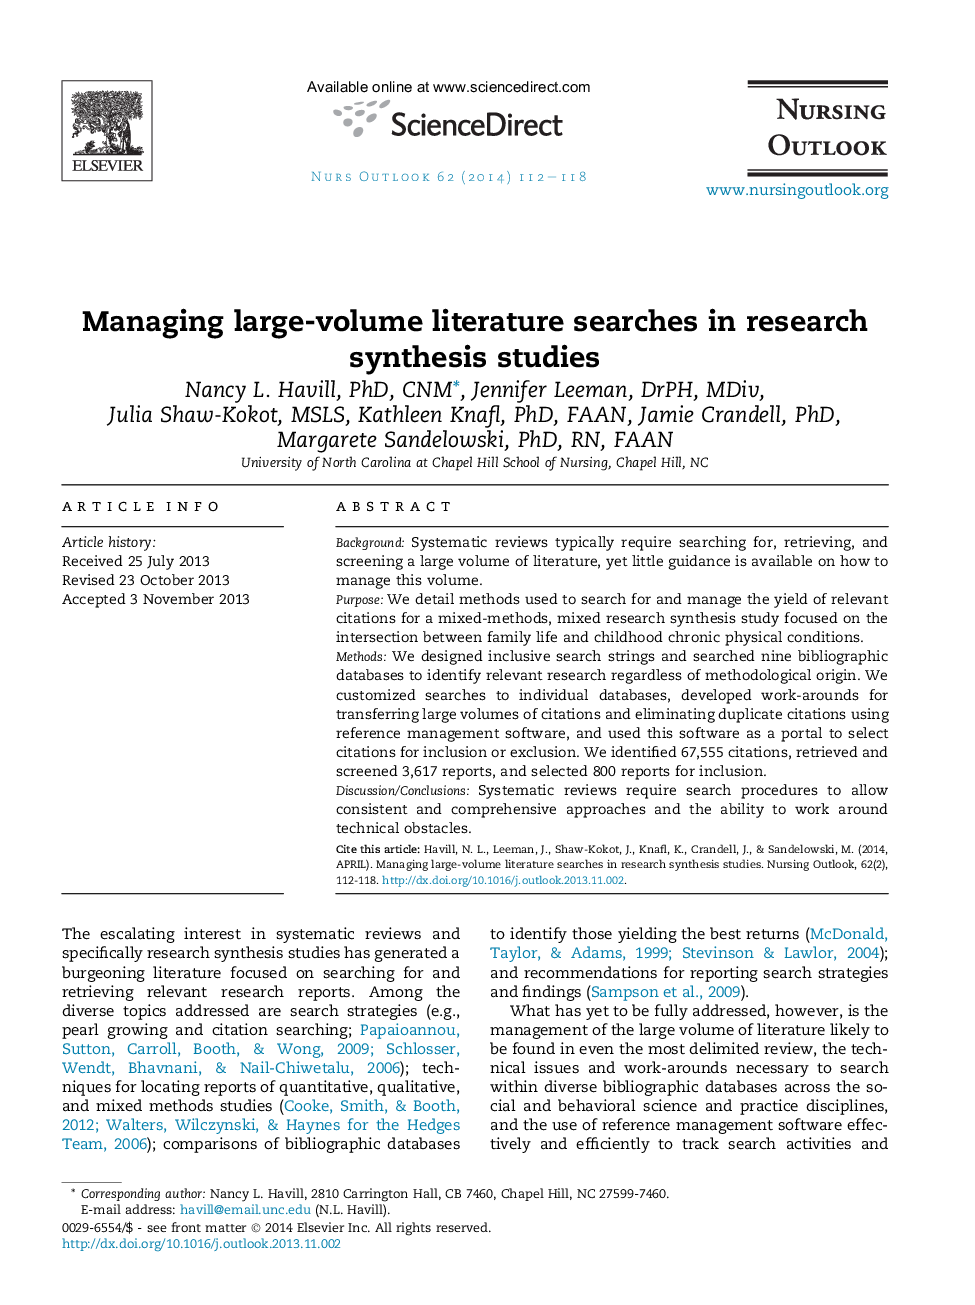 Managing large-volume literature searches in research synthesis studies